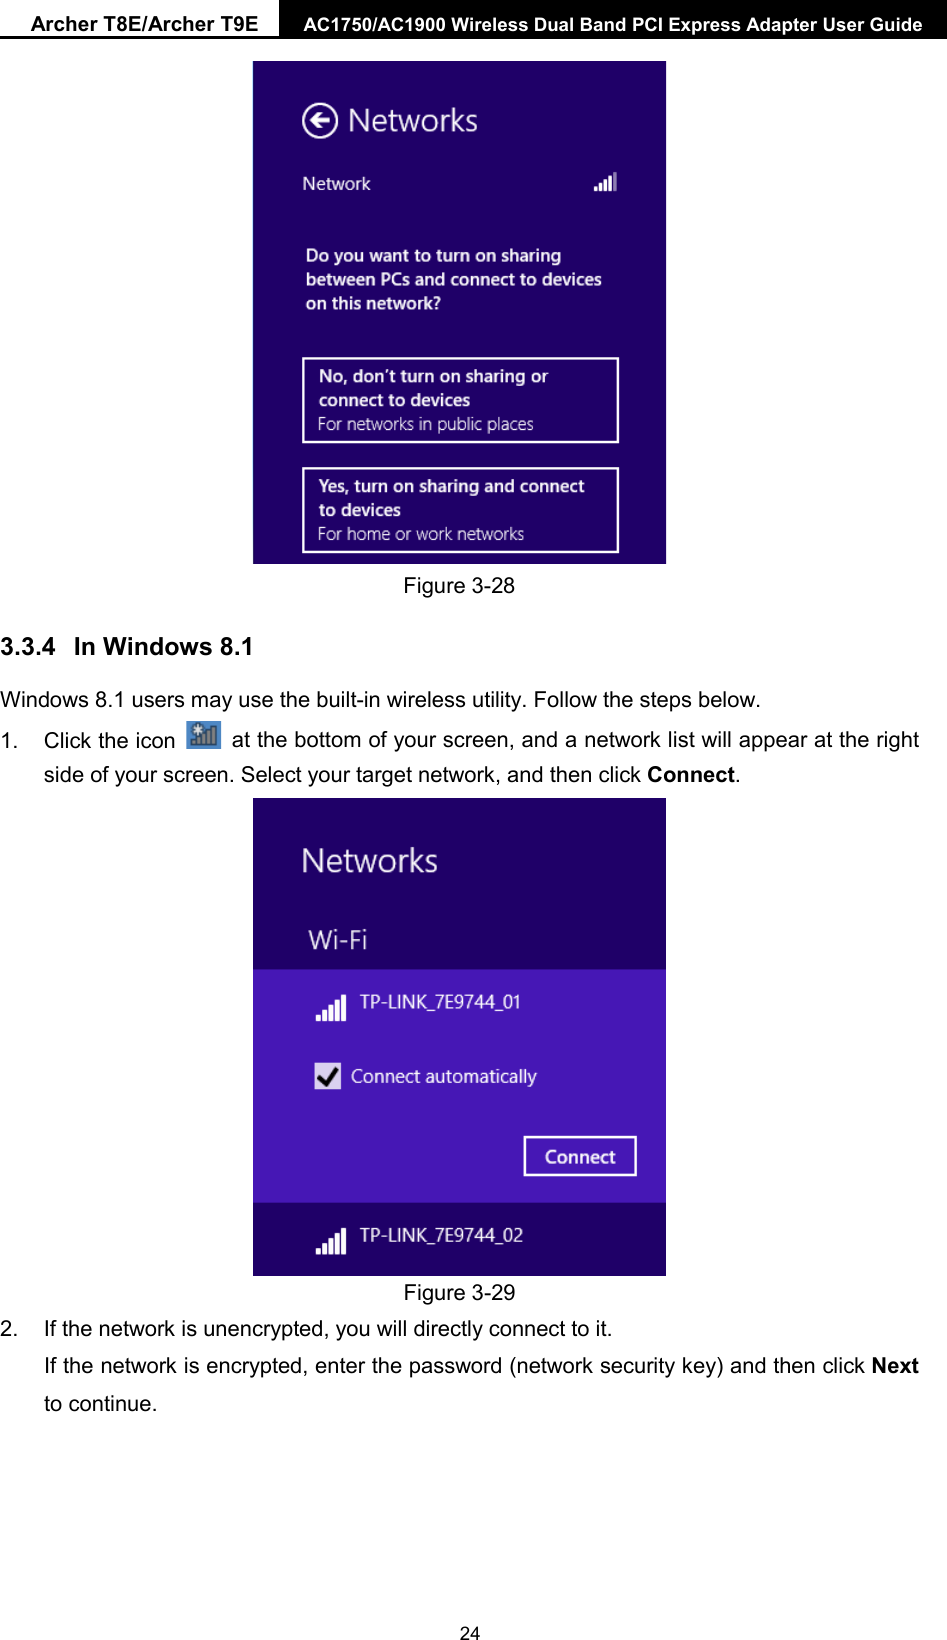 Archer T8E/Archer T9E AC1750/AC1900 Wireless Dual Band PCI Express Adapter User Guide   Figure 3-28 3.3.4 In Windows 8.1 Windows 8.1 users may use the built-in wireless utility. Follow the steps below. 1. Click the icon   at the bottom of your screen, and a network list will appear at the right side of your screen. Select your target network, and then click Connect.  Figure 3-29 2. If the network is unencrypted, you will directly connect to it.   If the network is encrypted, enter the password (network security key) and then click Next to continue.  24 